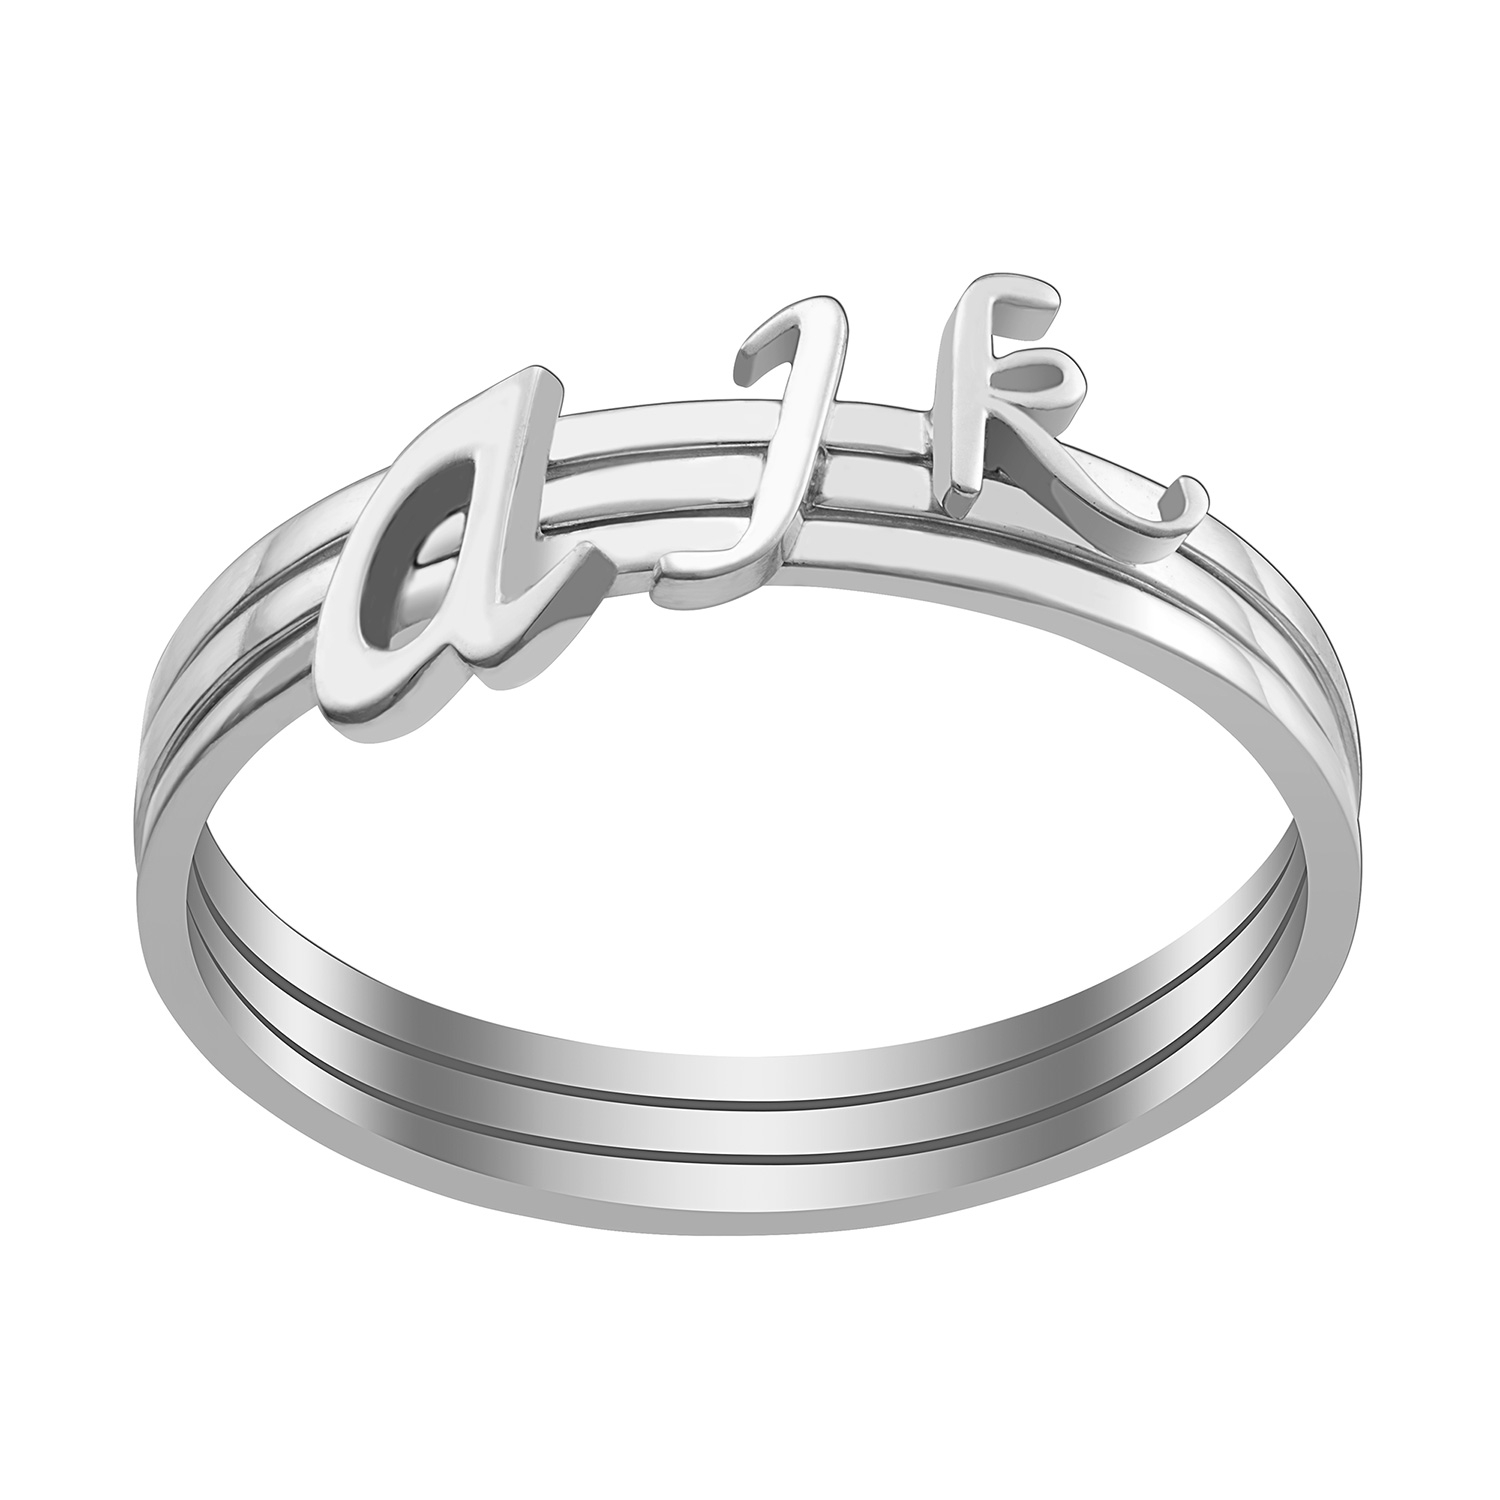 Sterling Silver Petite Lowercase Script Initials Ring - Set of 3